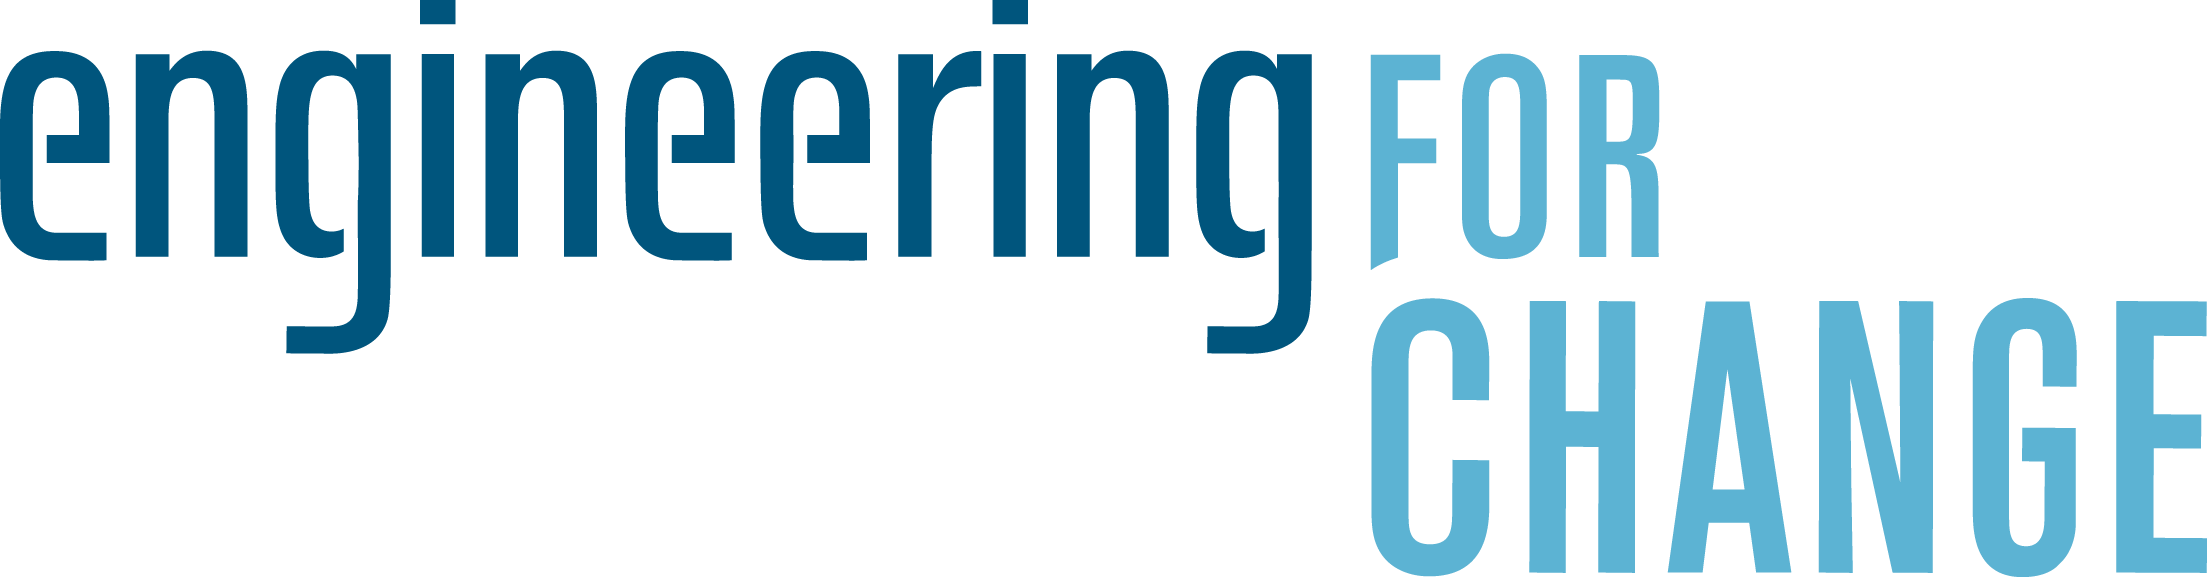 Engineering for Change (E4C) Logo Color